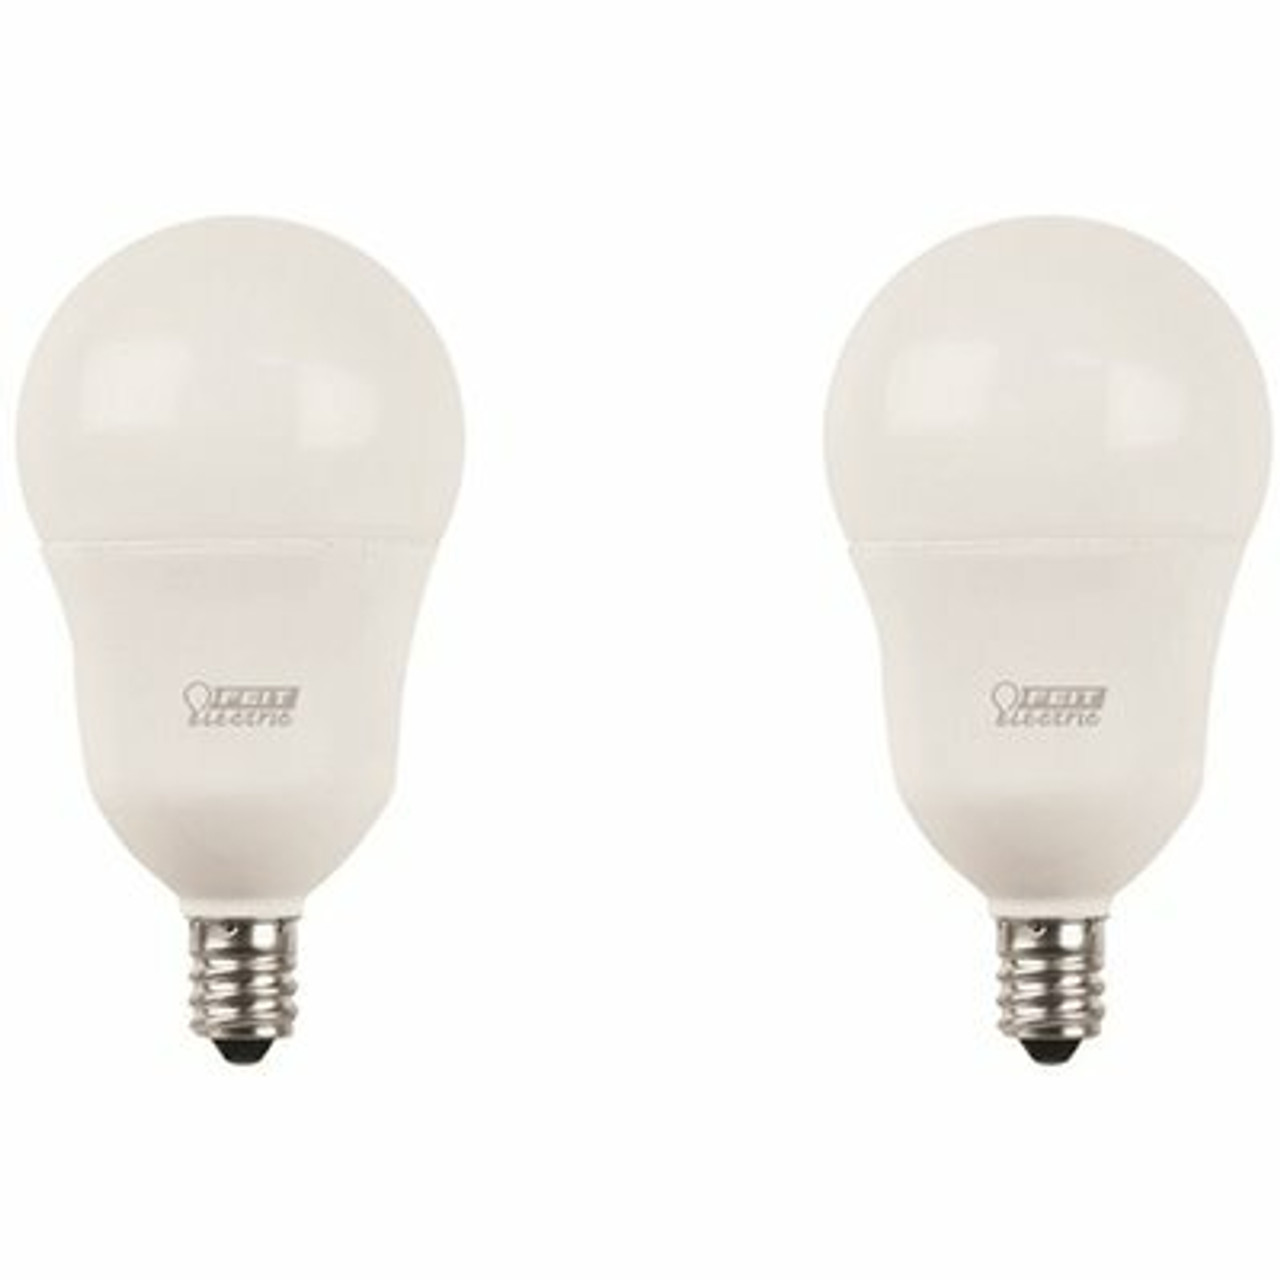 40-Watt Equivalent A15 Candelabra Dimmable Filament Cec Clear Glass Led Ceiling Fan Light Bulb, Soft White (2-Pack)